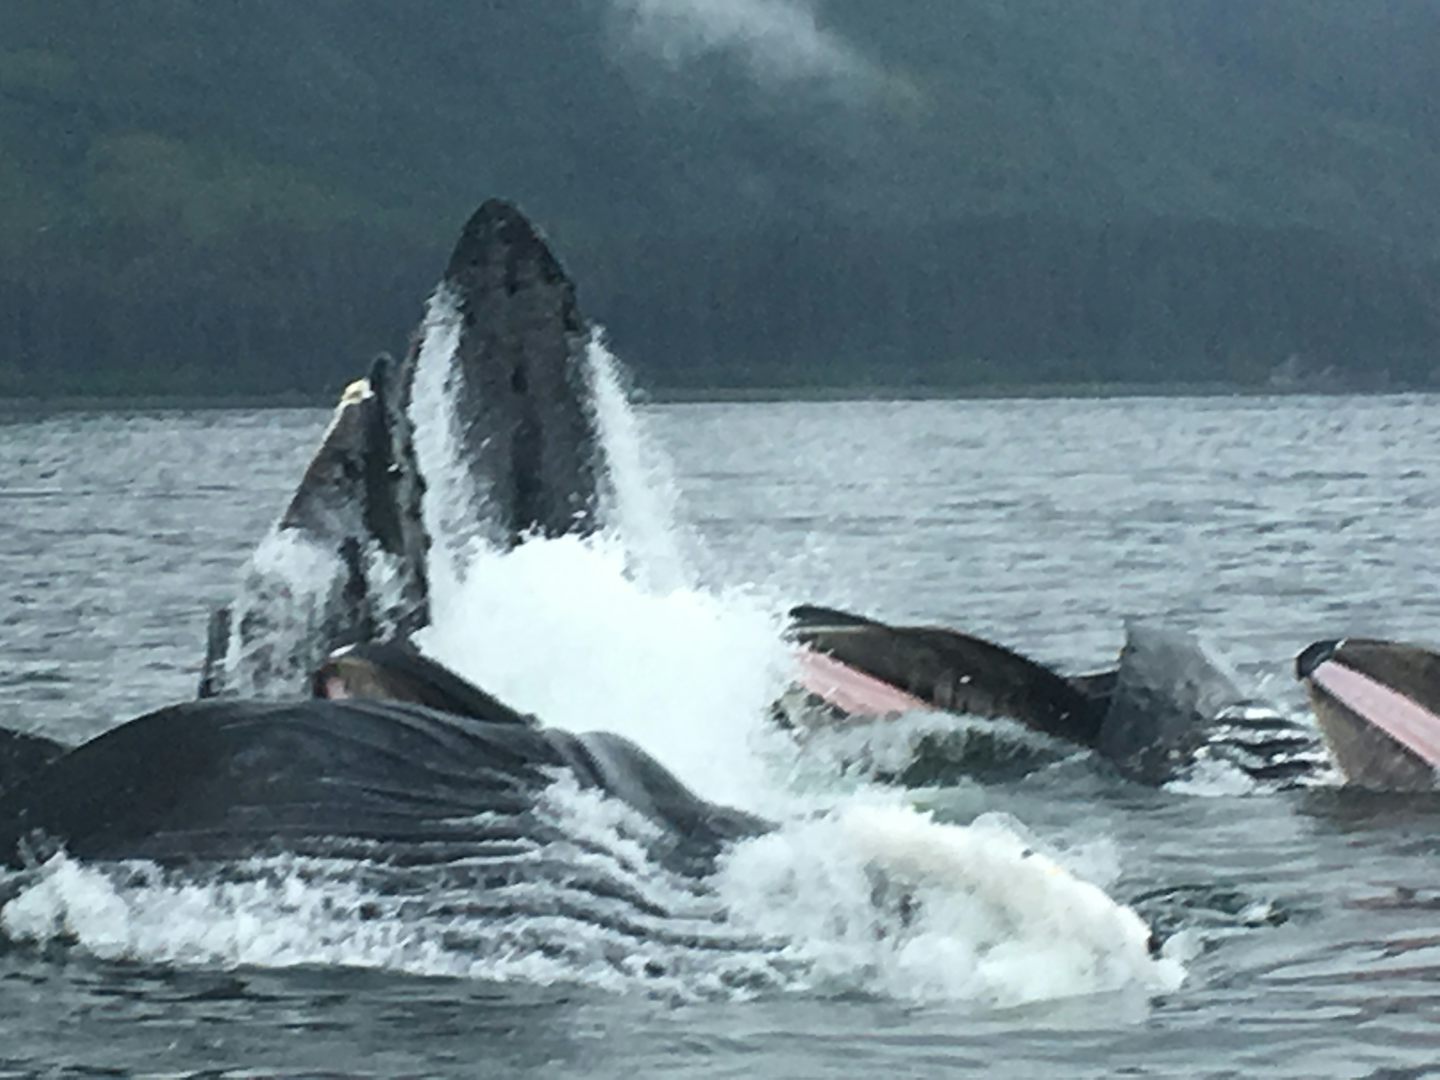 5 humpback whales bubble feeding at Icy Strait